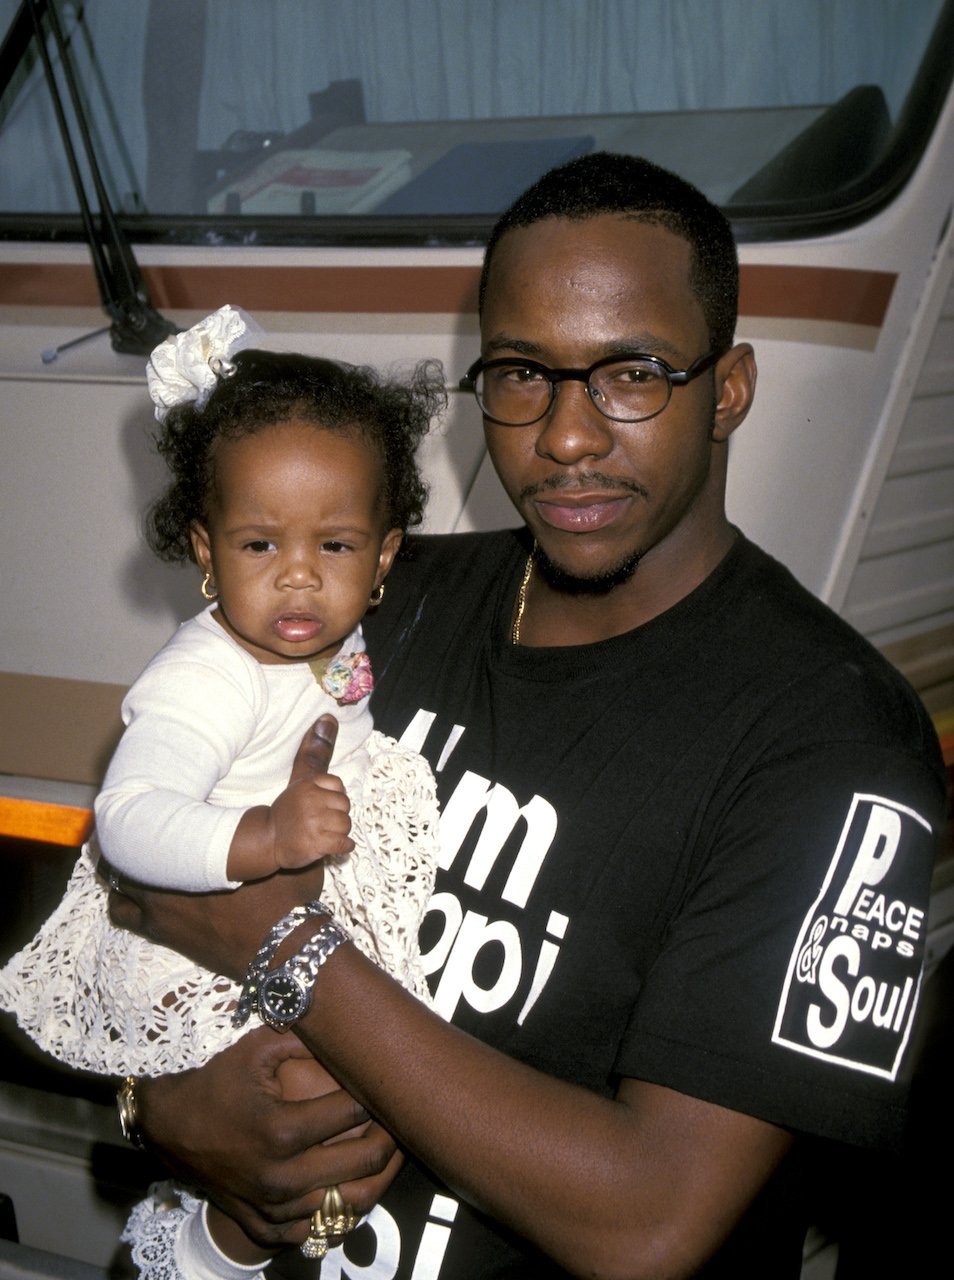 Bobbi Kristina Brown and Bobby Brown pose for photo; Brown says people tried to keep him away from his daughter